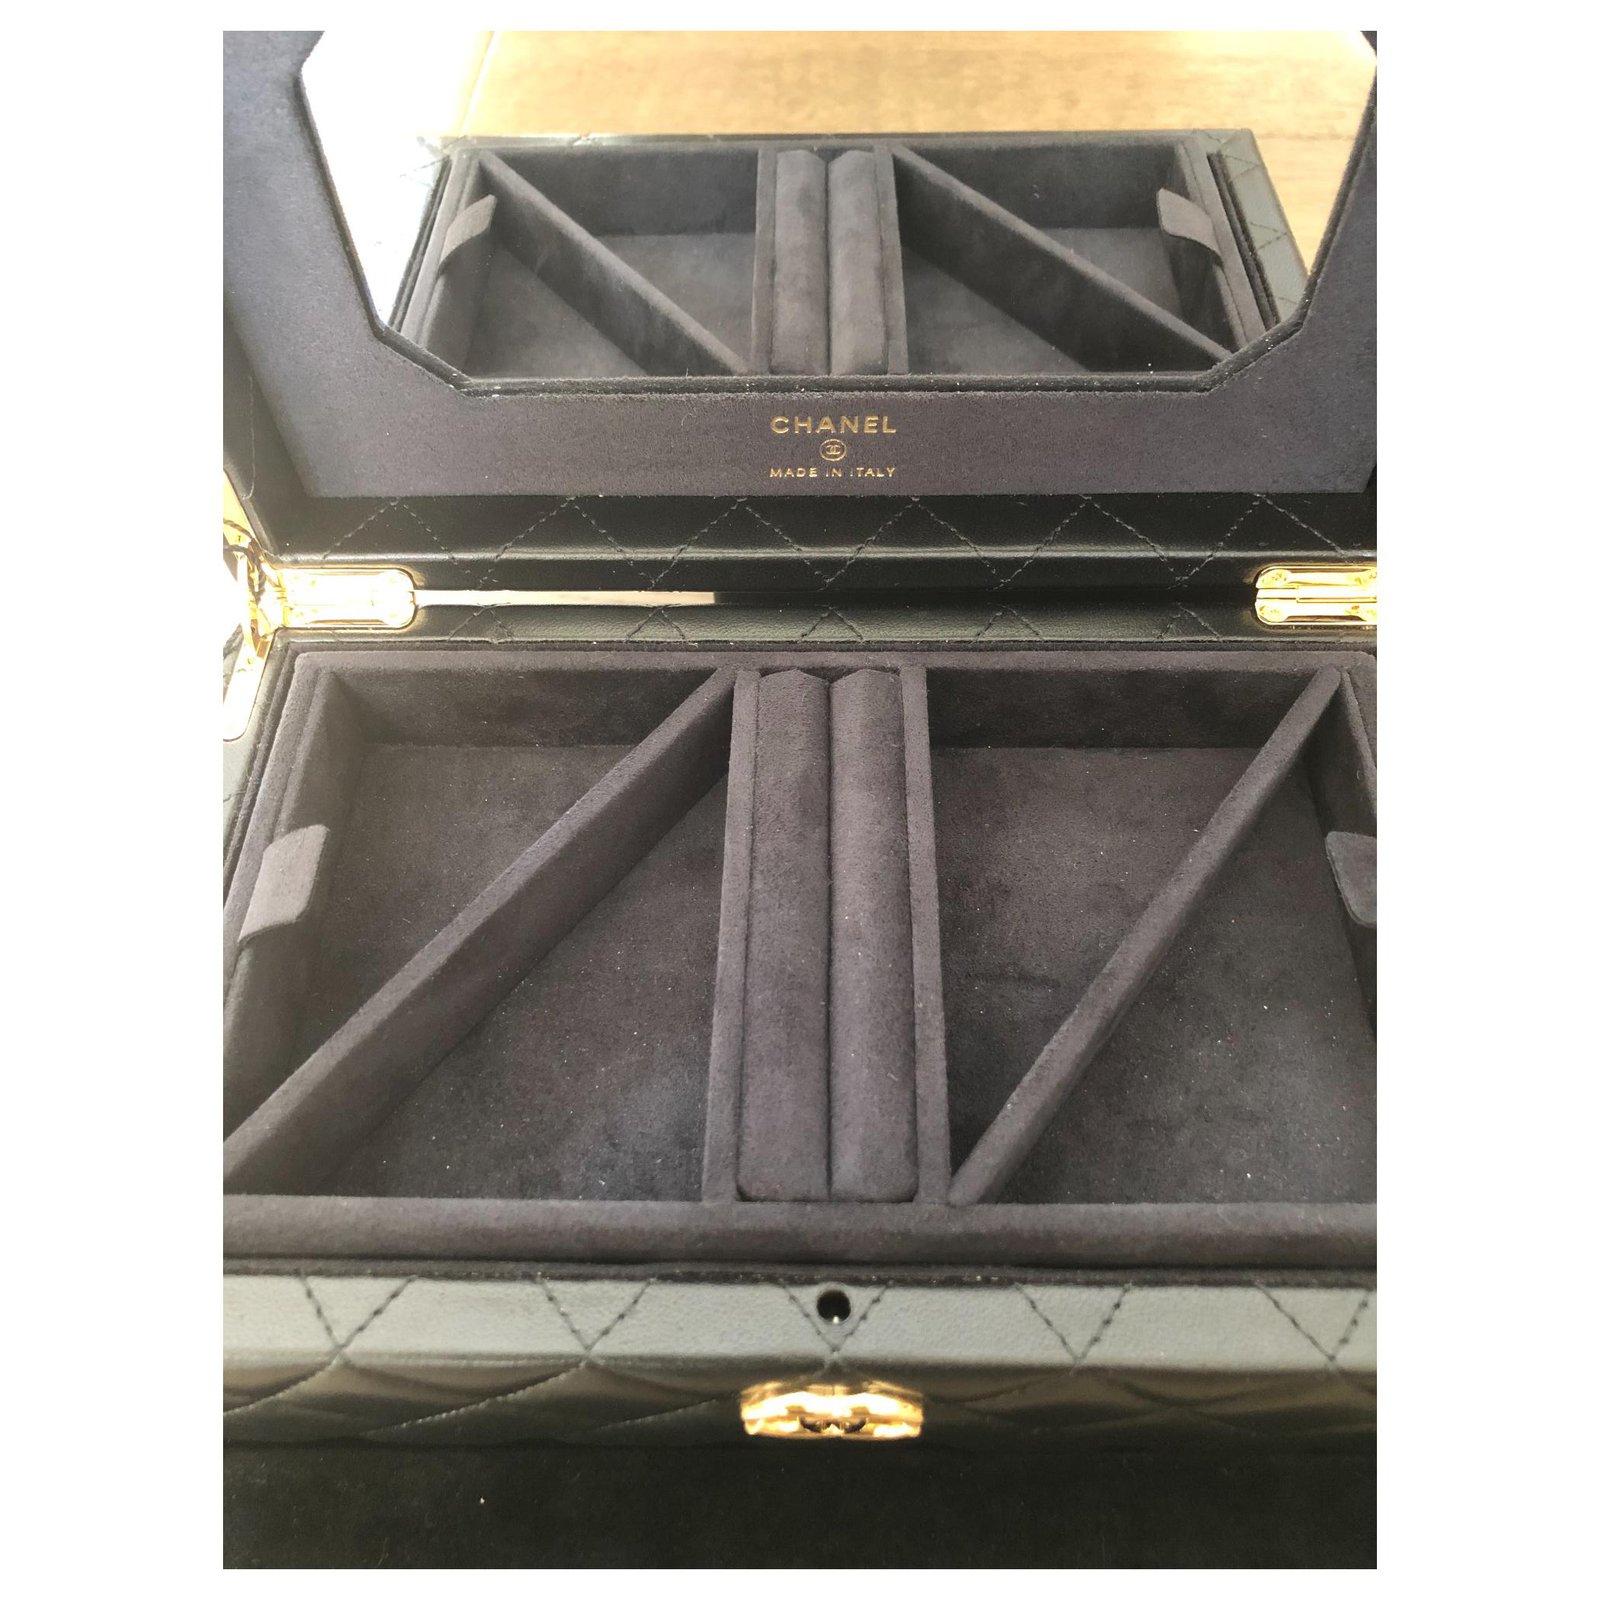 A BLACK LAMBSKIN LEATHER QUILTED JEWELRY BOX WITH GOLD HARDWARE